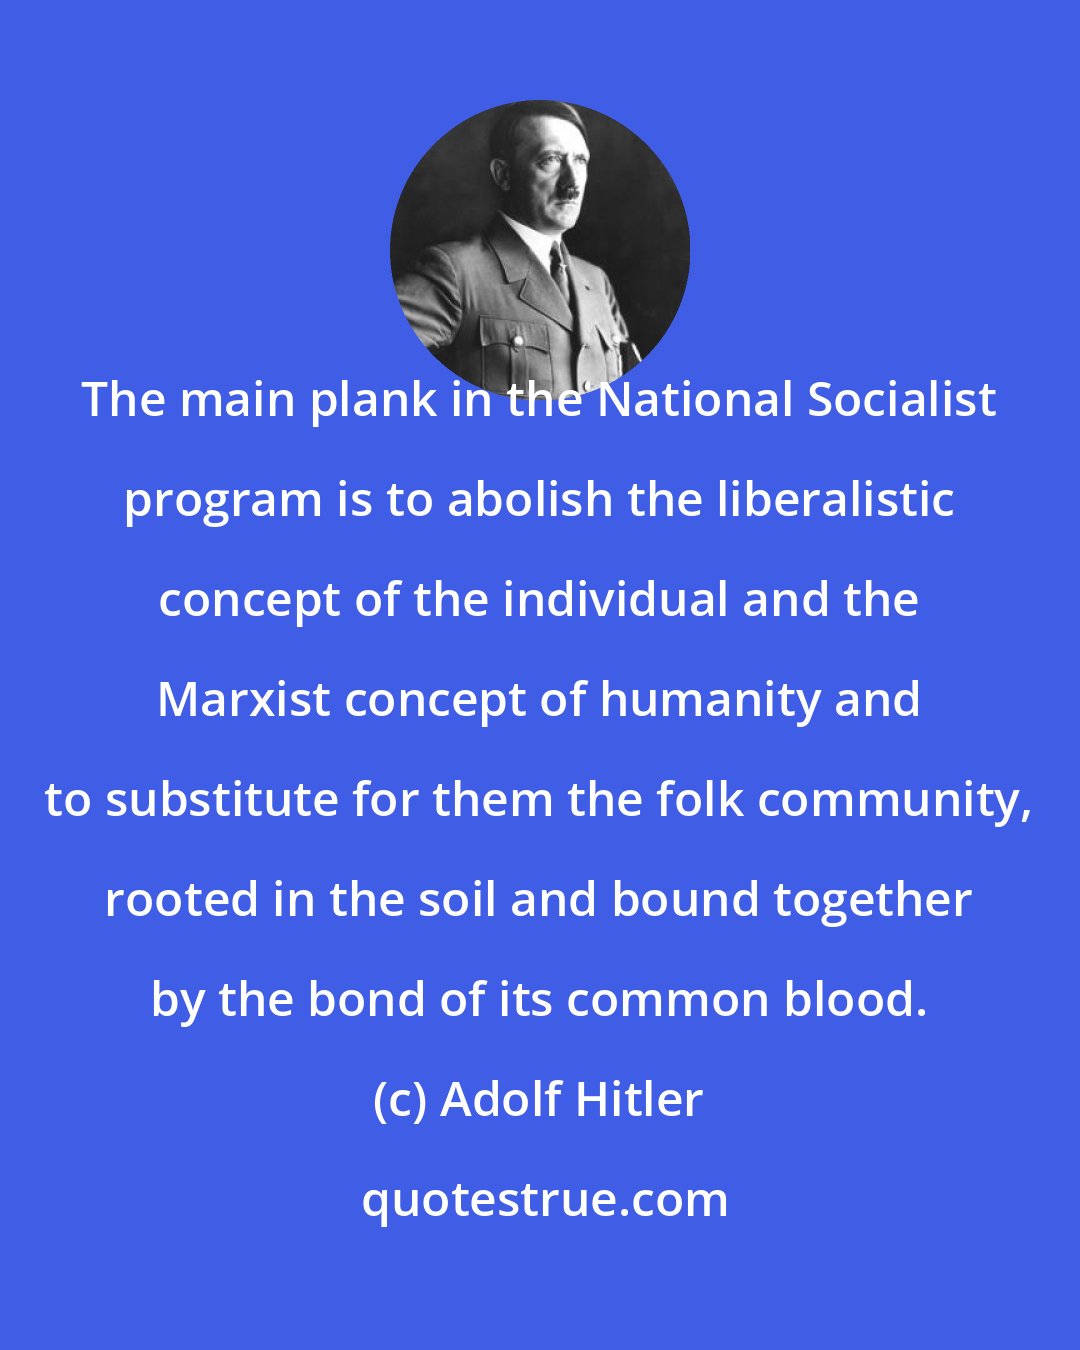 Adolf Hitler: The main plank in the National Socialist program is to abolish the liberalistic concept of the individual and the Marxist concept of humanity and to substitute for them the folk community, rooted in the soil and bound together by the bond of its common blood.